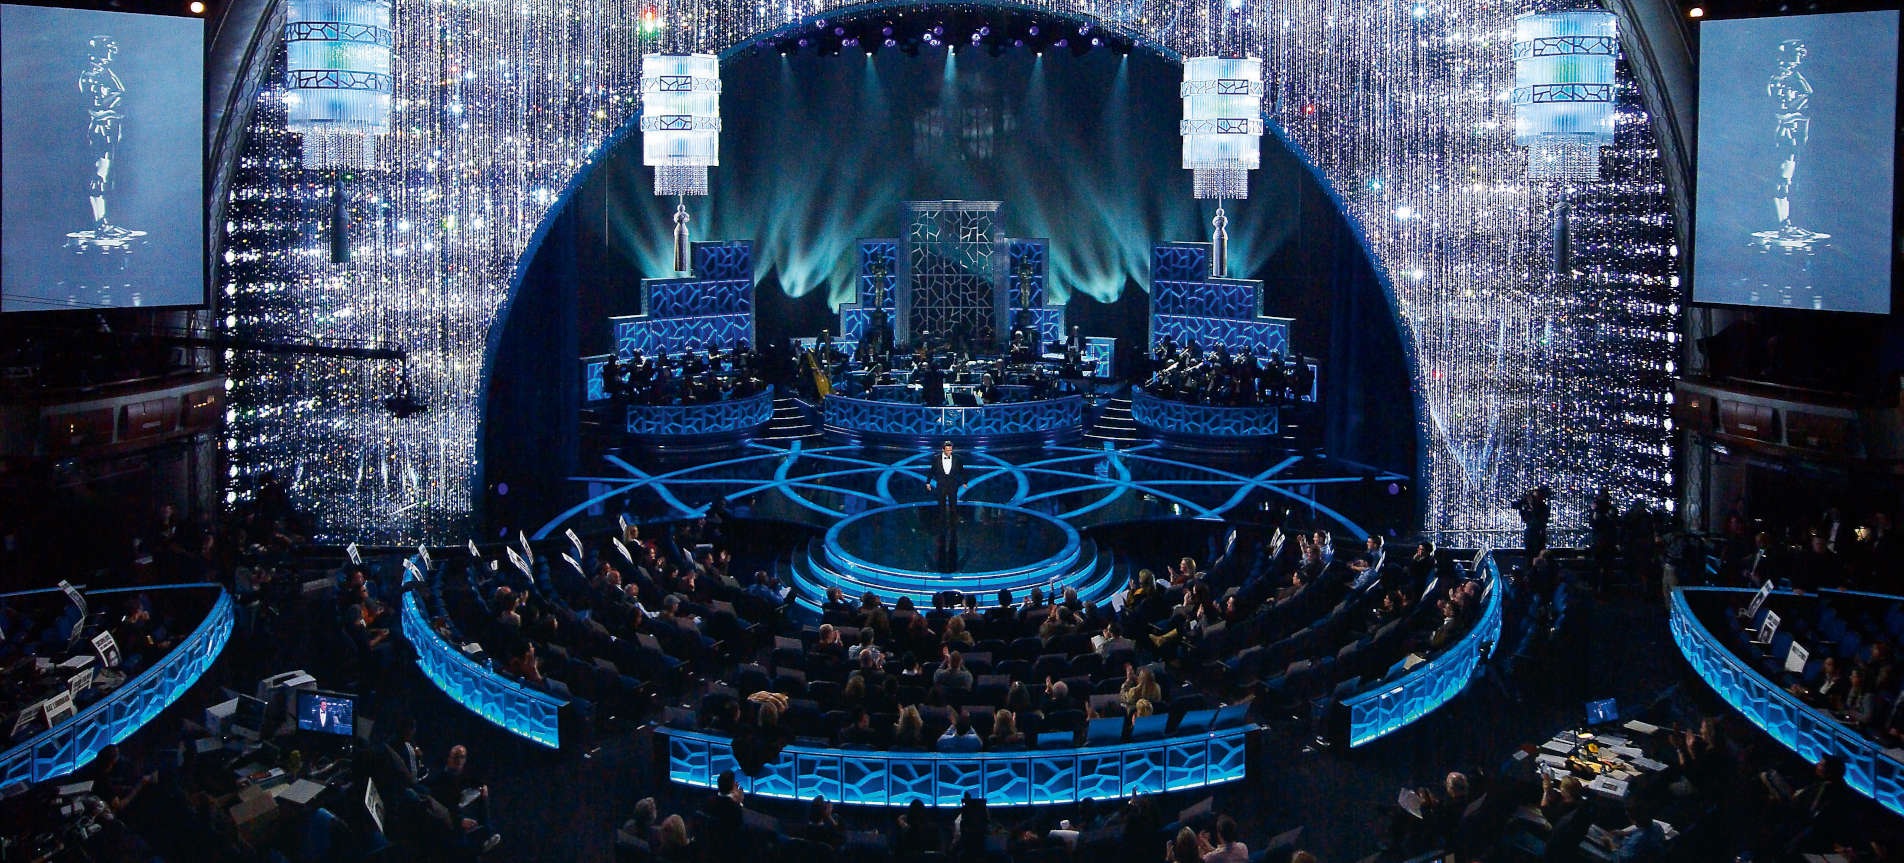 Detail from Stage design for the 81st and 82nd Academy Awards, 2008, 2009, Dolby Theatre (formerly the Kodak Theatre), Hollywood, Los Angeles. Photo by Eric Laignel